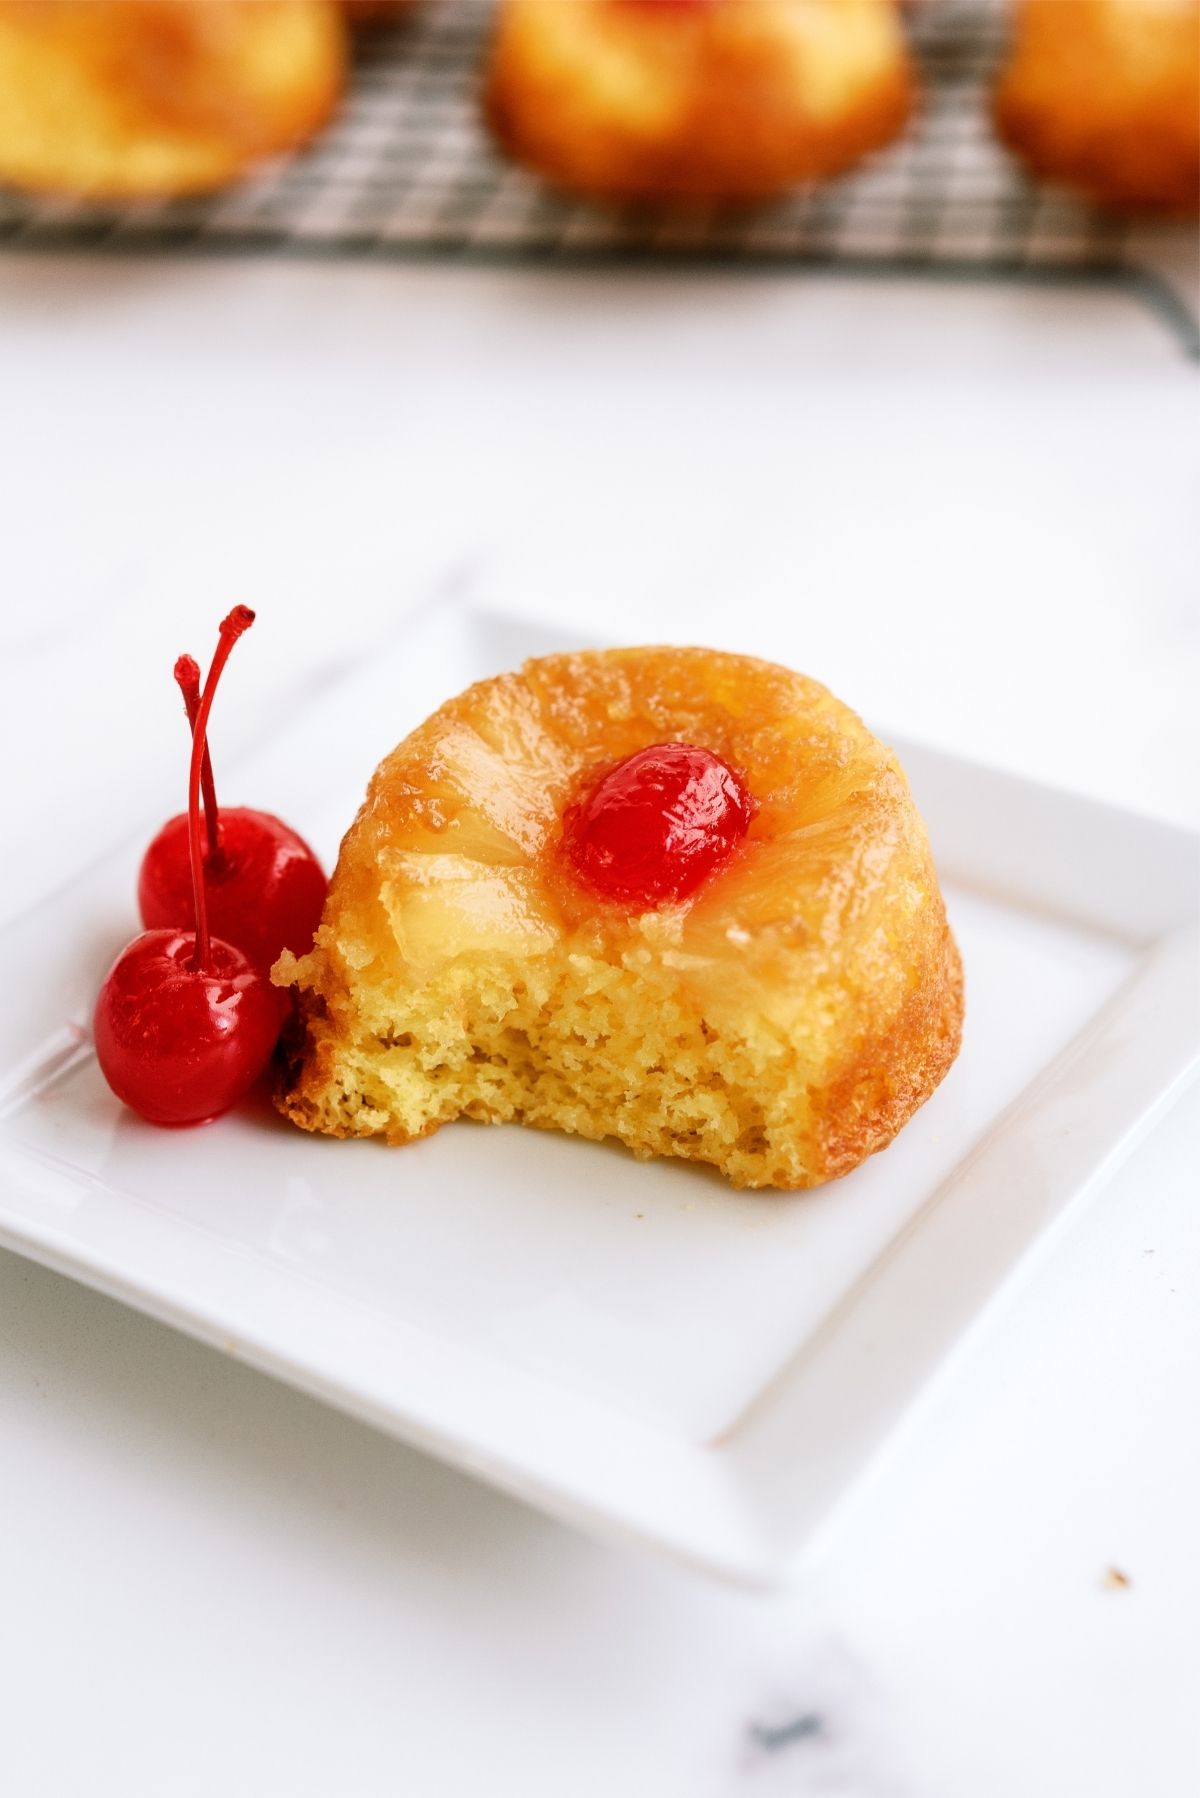 Mini Pineapple Upside Down Cake on a plate with a bite taken out of it.